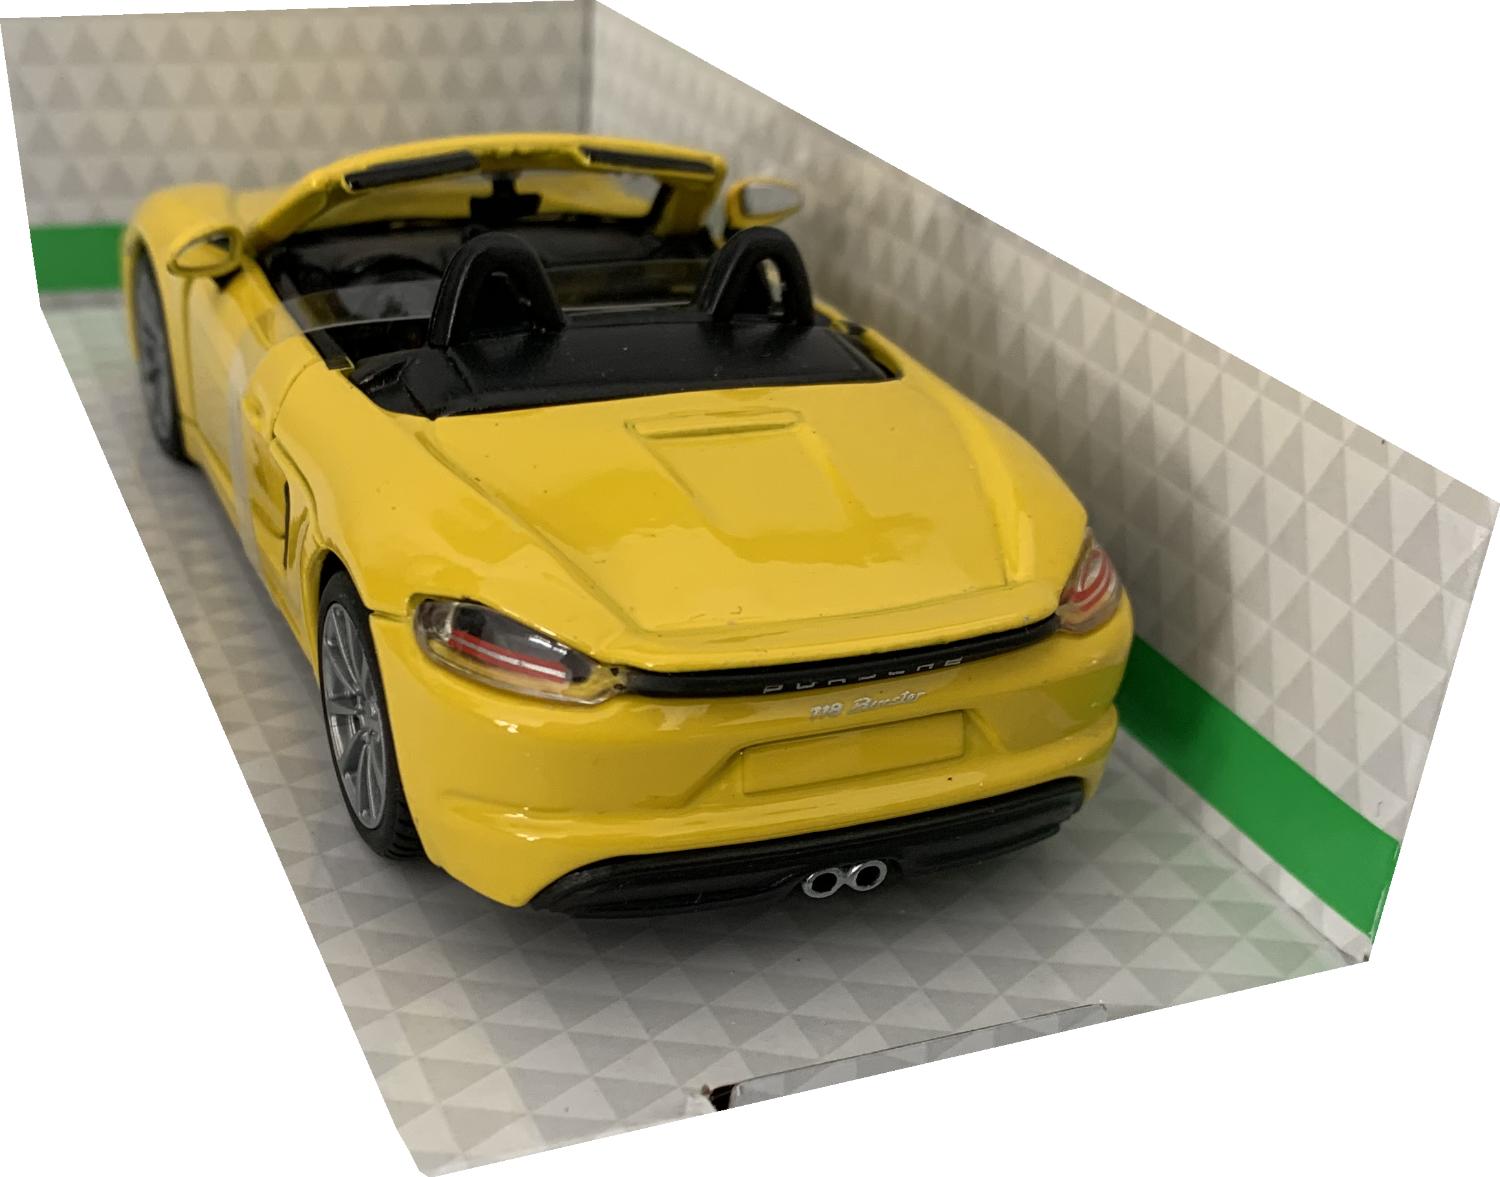 The Porsche 718 Boxster is decorated in yellow with rear spoiler and silver wheels. Other trims are finished in black and silver. Features include opening driver and passenger door